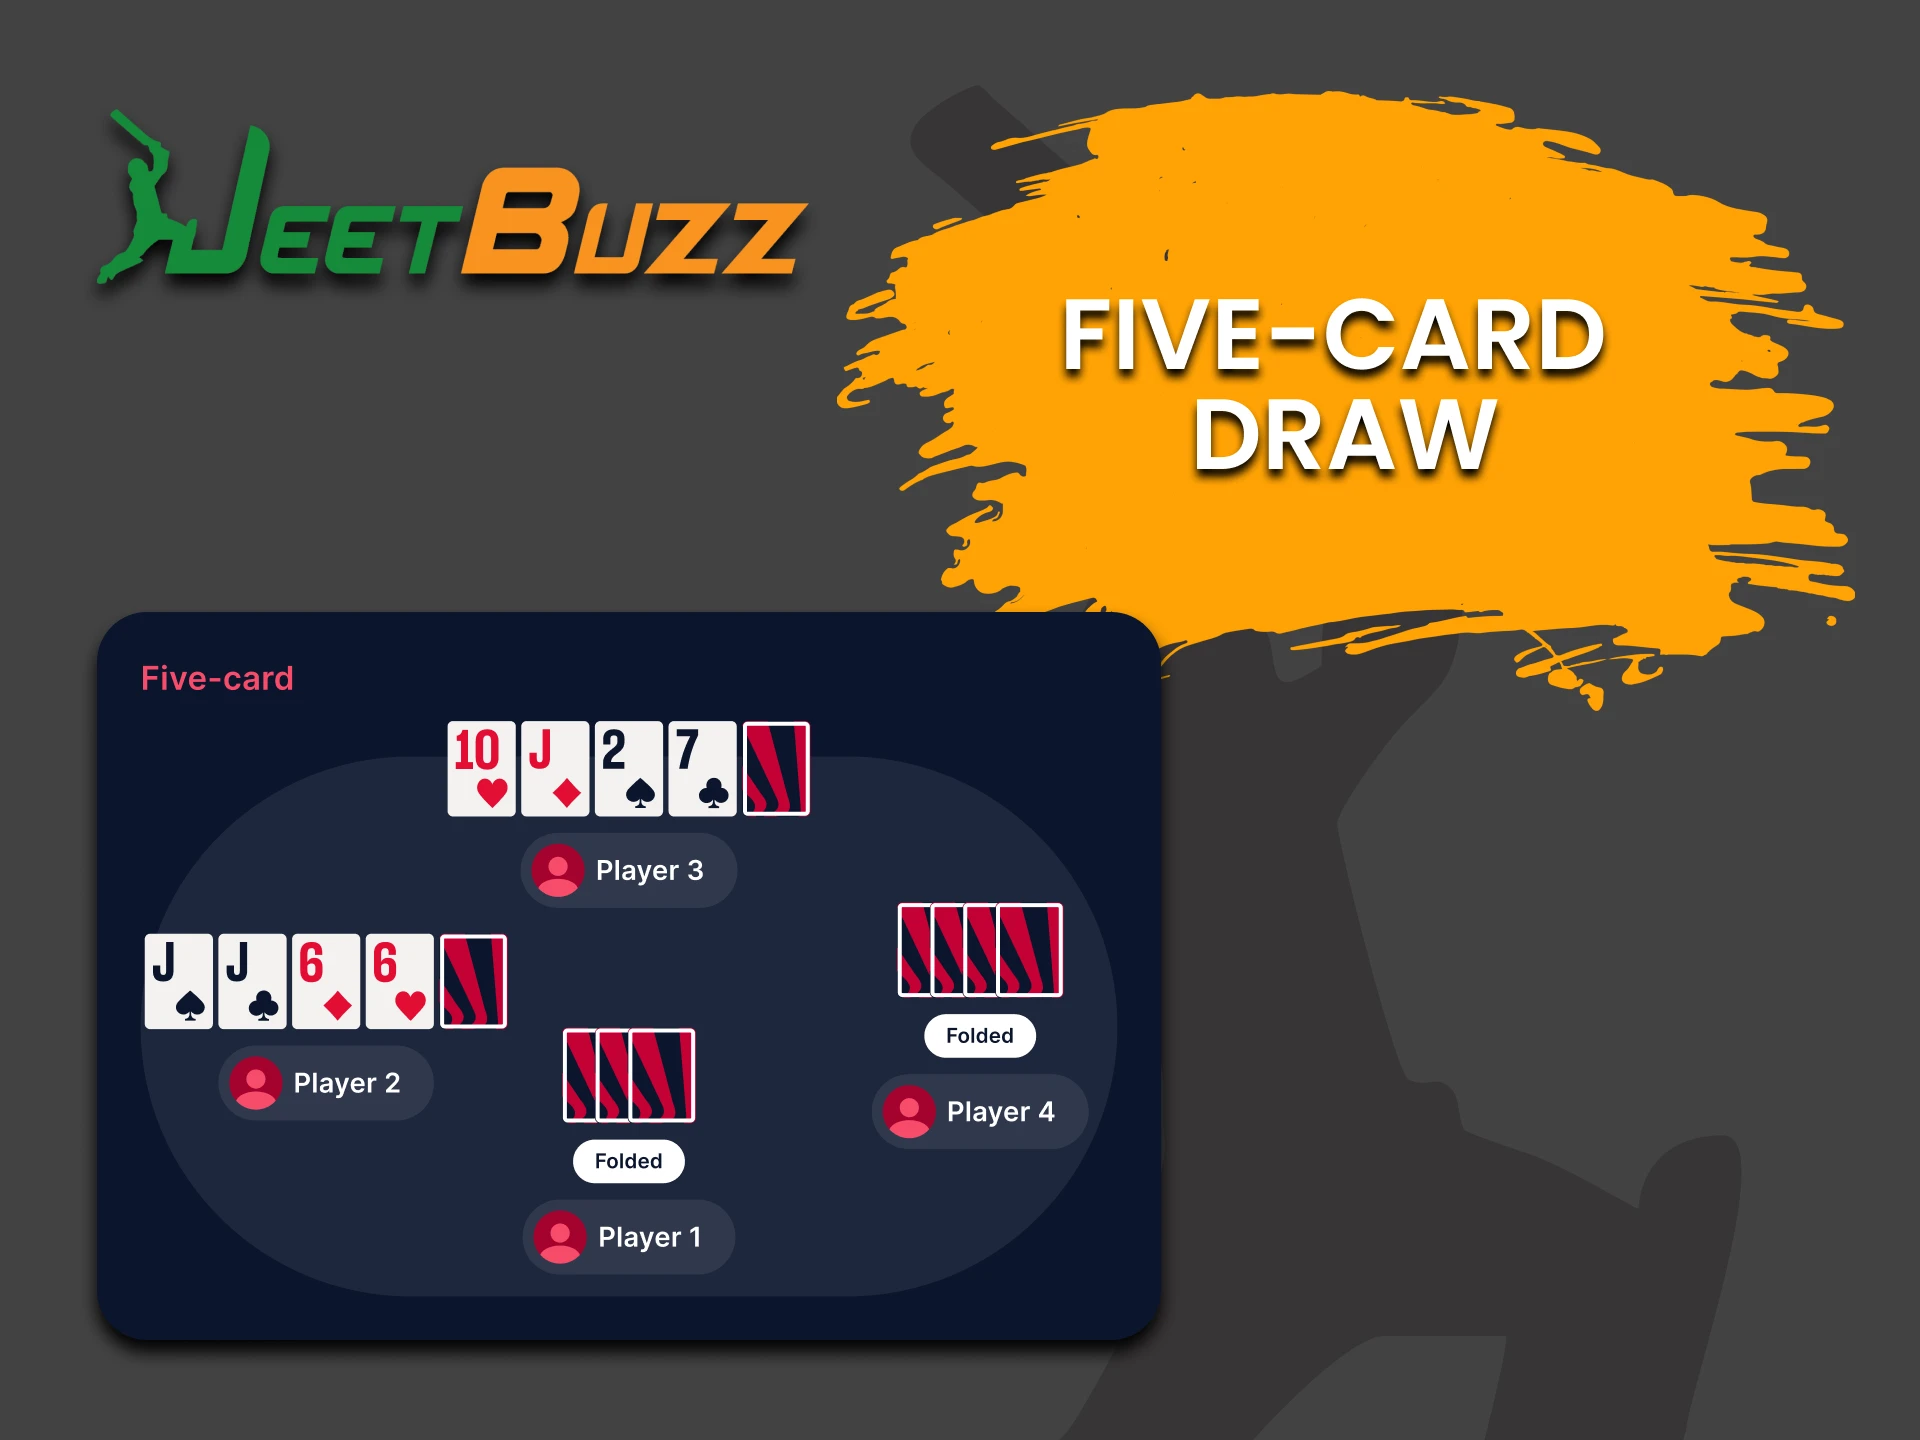 To play Poker on JeetBuzz, choose Five-Card Draw.